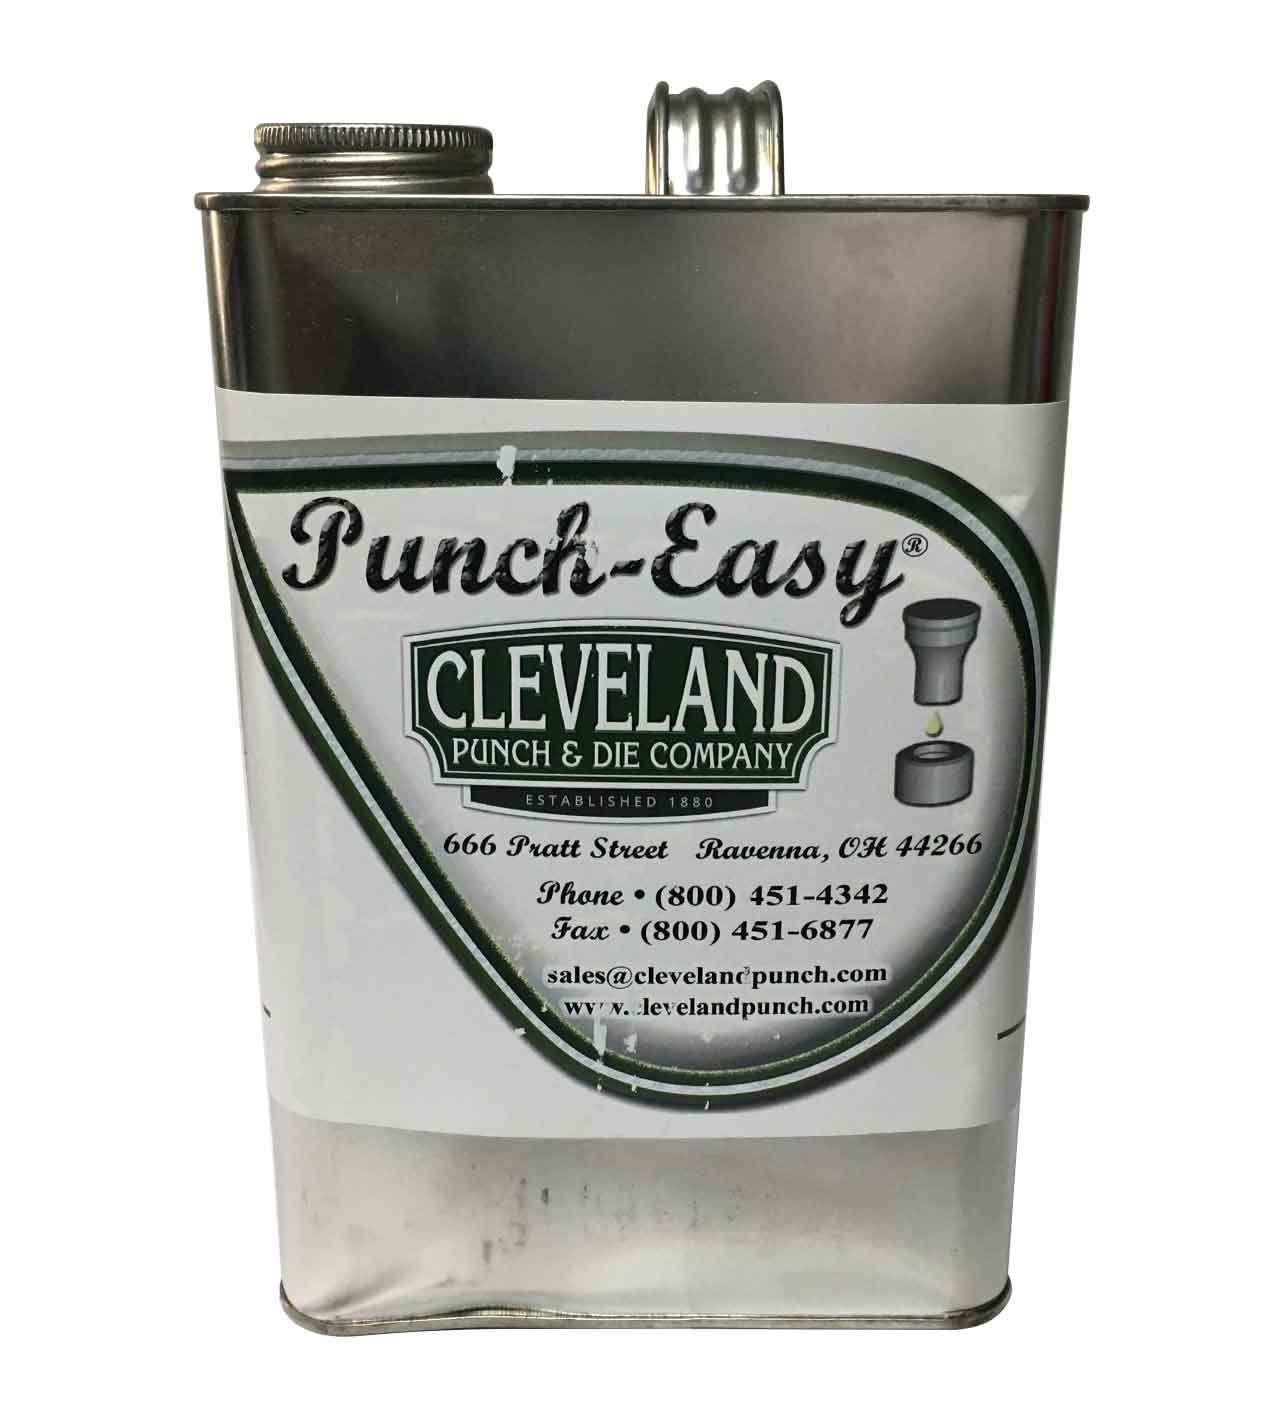 Punch Easy Lubricante 1 Galon